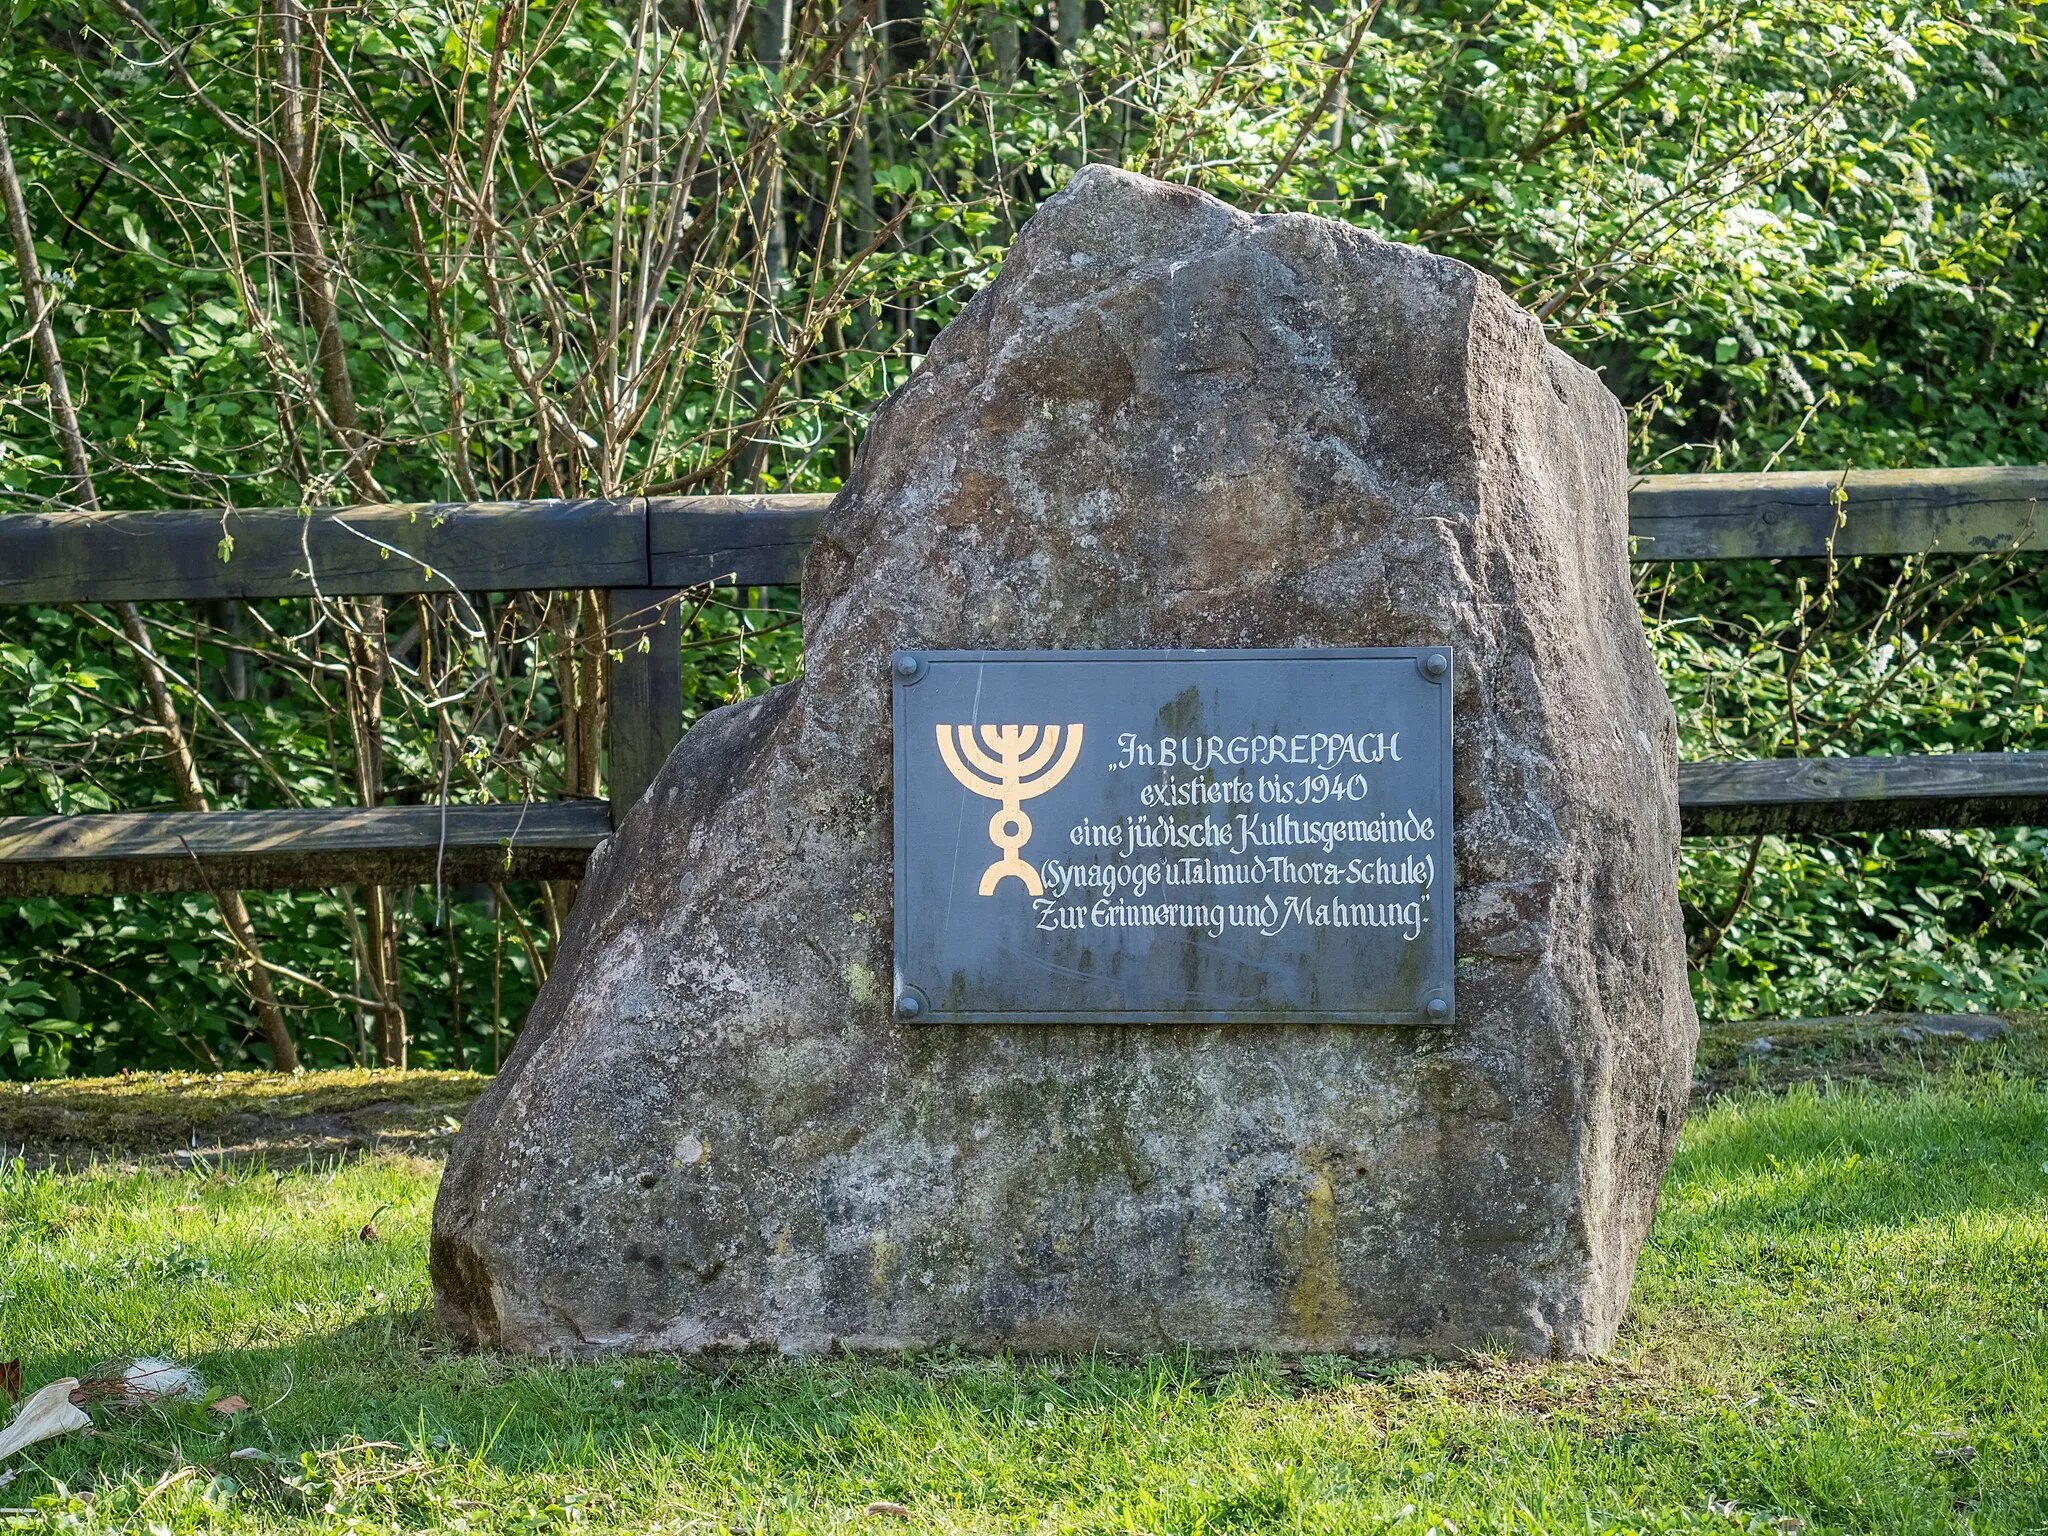 Photo showing: Memorial to the Jewish community in Burgpreppach